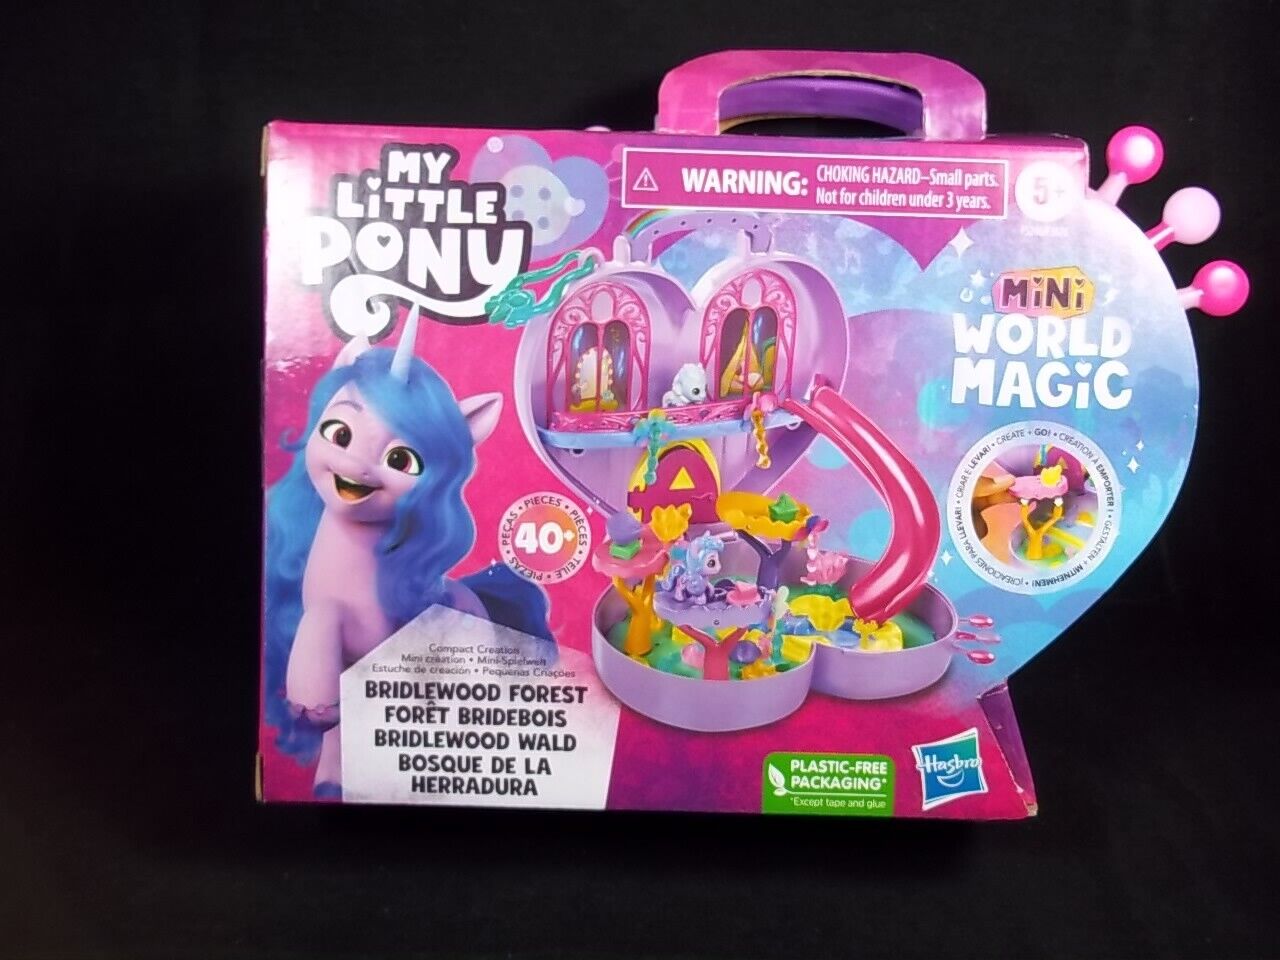 My Little Pony Mini World Magic Bridlewood Forest compact playset MLP NEW